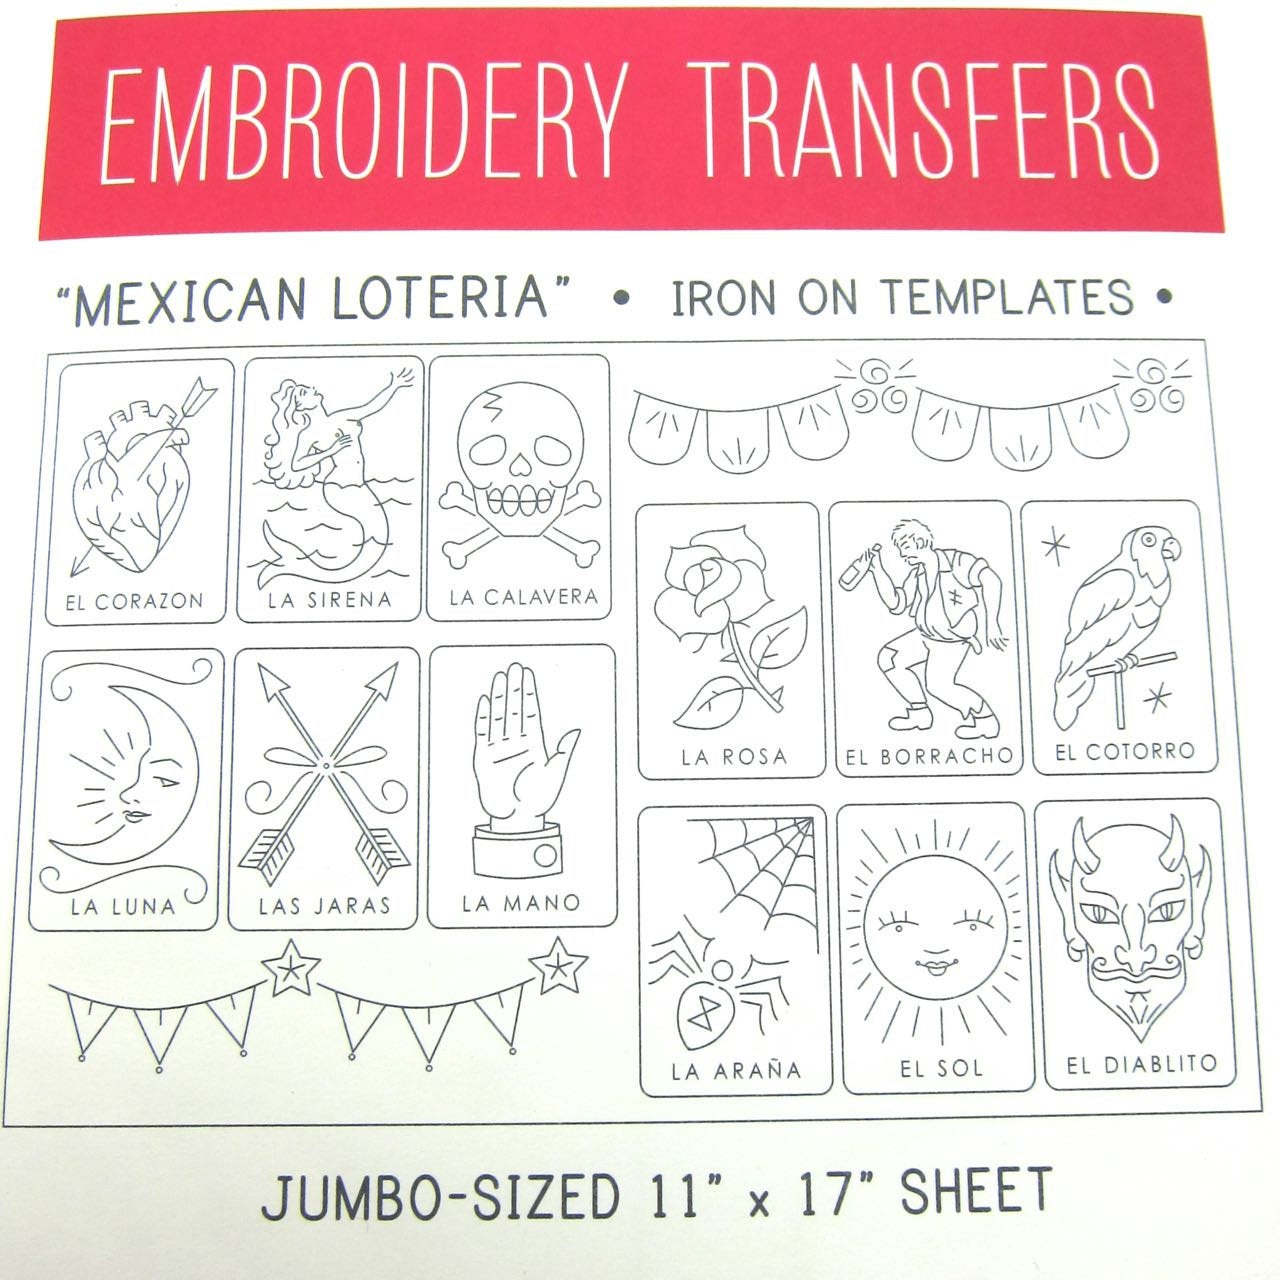 Transfer Embroidery Pattern Embroidery Pattern Sublime Stitching Iron On Transfer Hand Embroidery Pattern Mexican Loteria Big Sheet